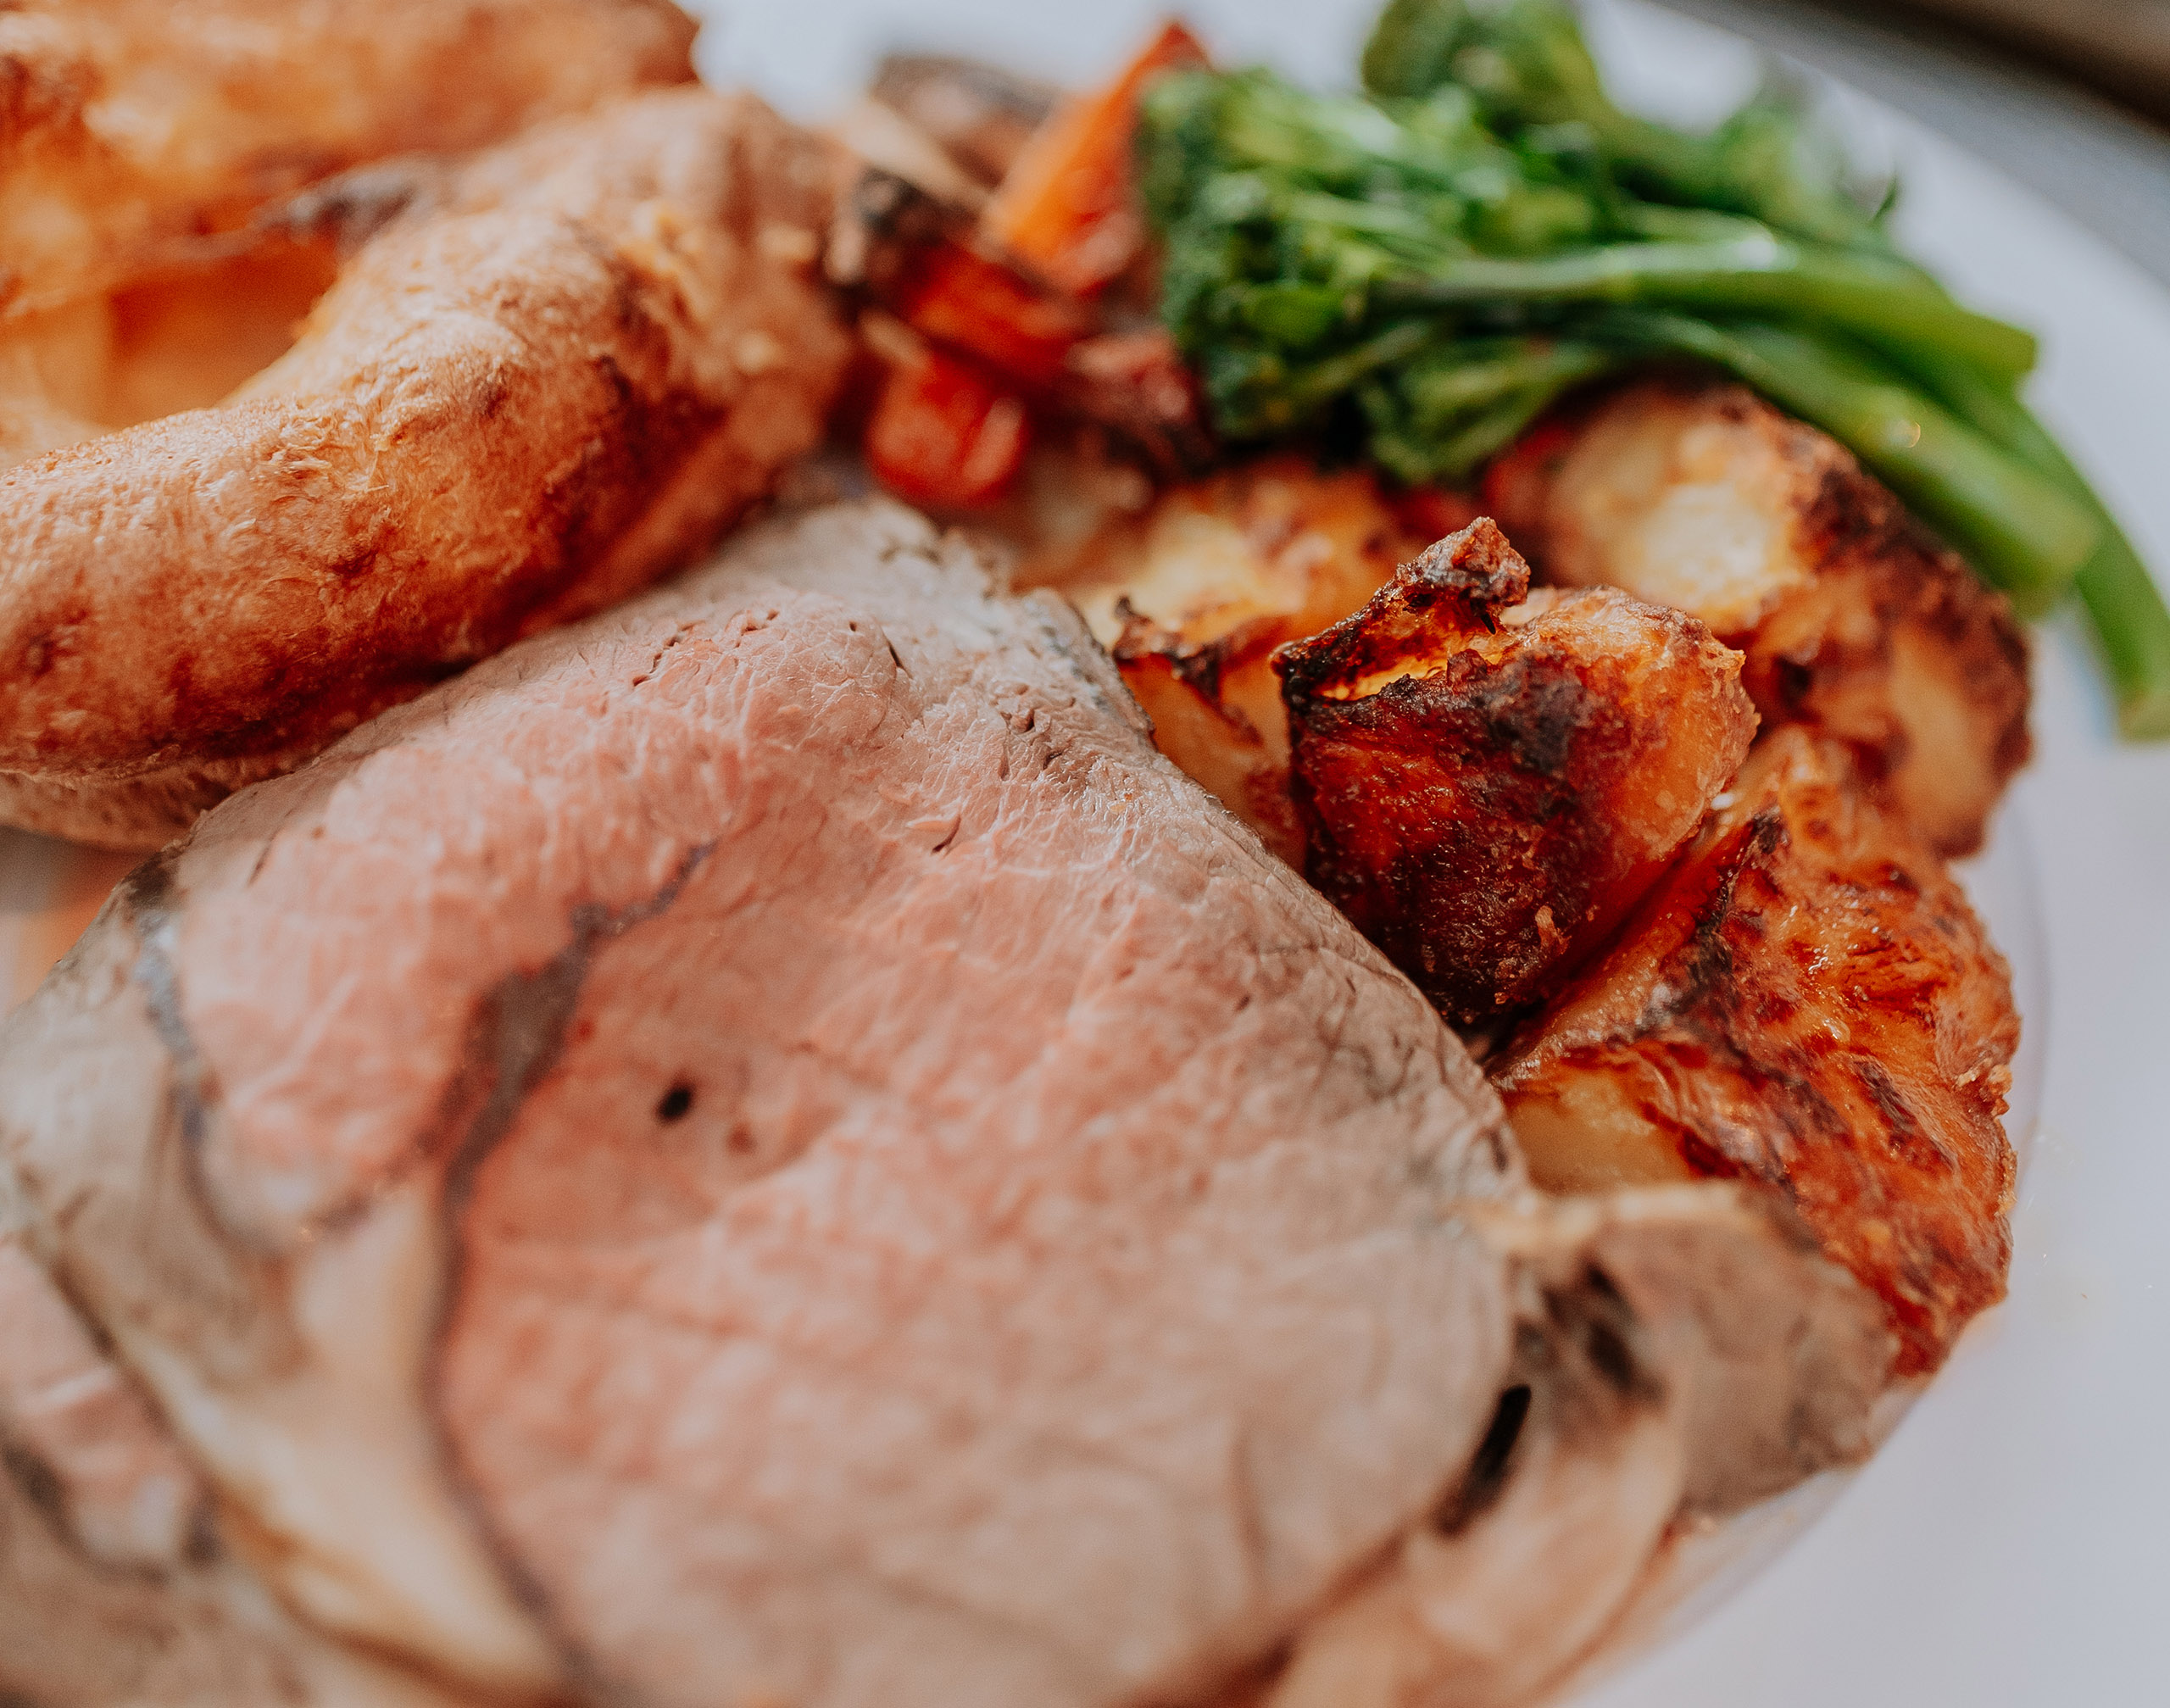 Close up photo of roast meat and potatoes, as part of a traditional Sunday roast dinner